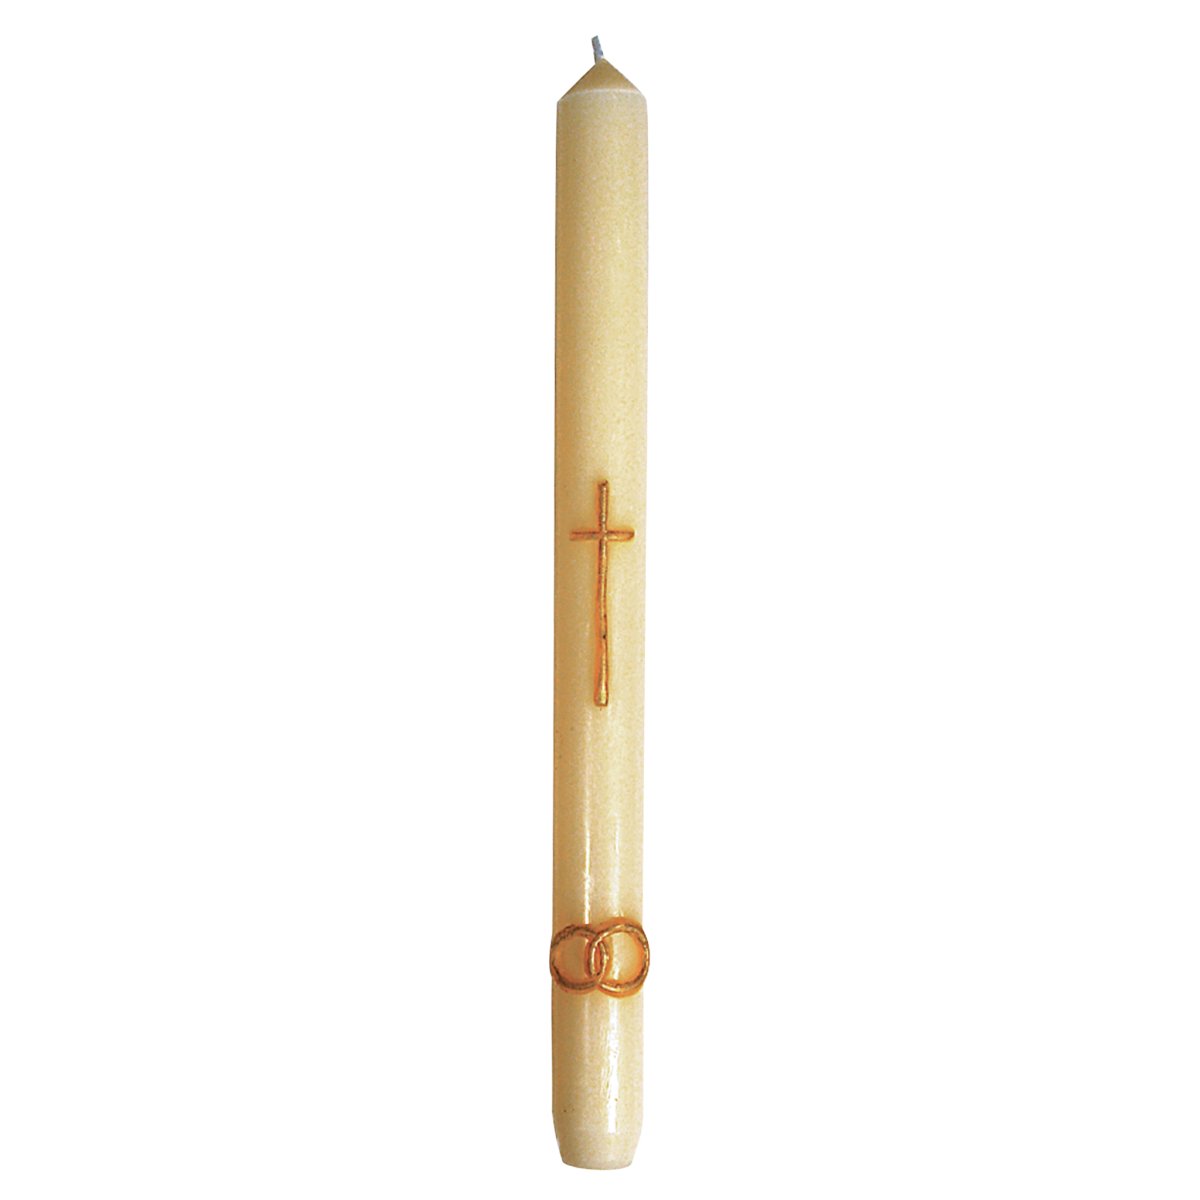 12" x 1" Sacramental Marriage Candle - Hayes & Finch